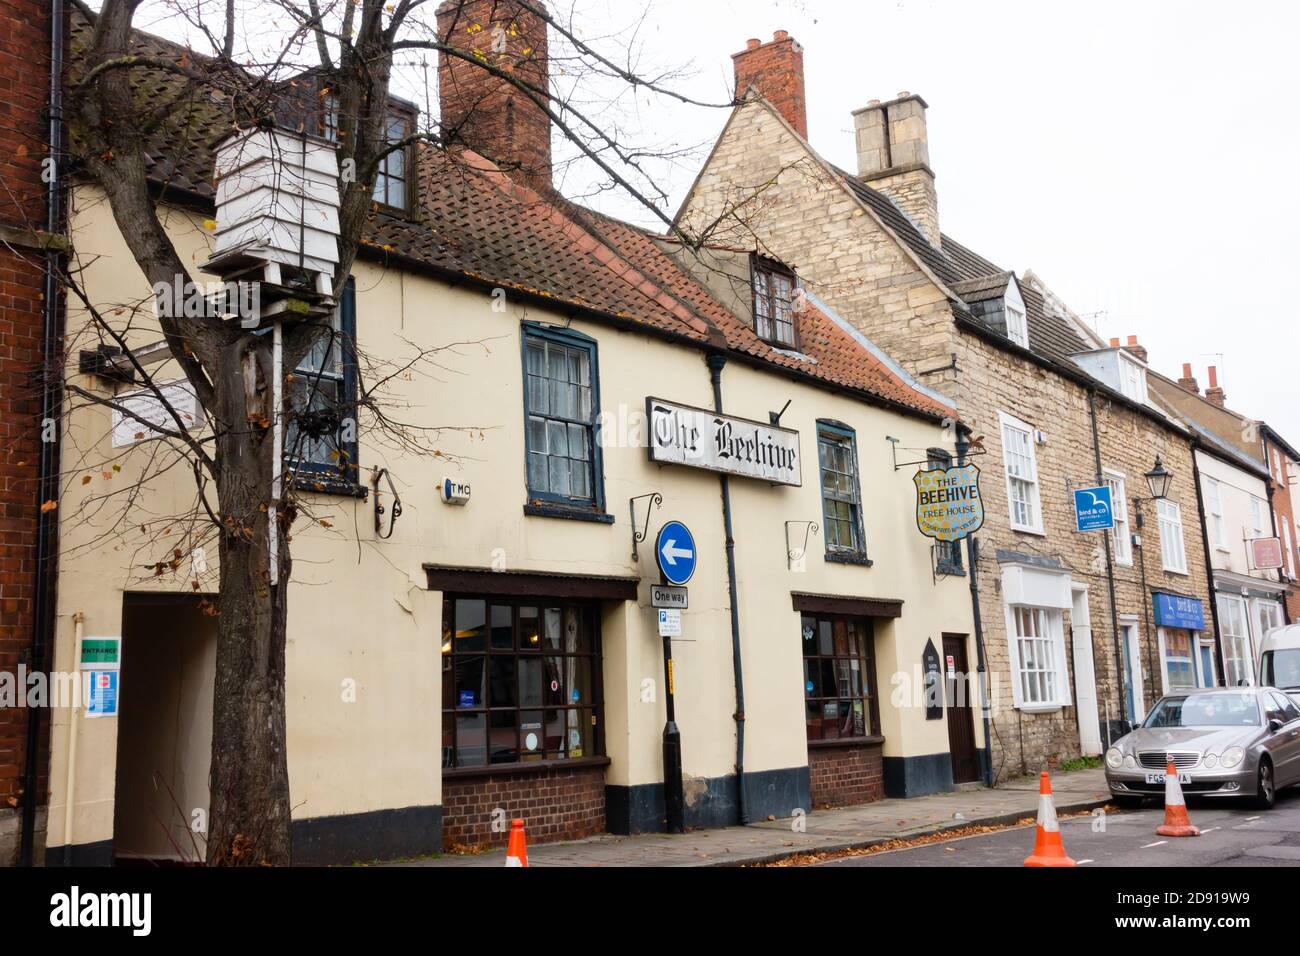 The Beehive Inn, living sign public house on Castlegate, Grantham, LKincolnshire, England. Stock Photo